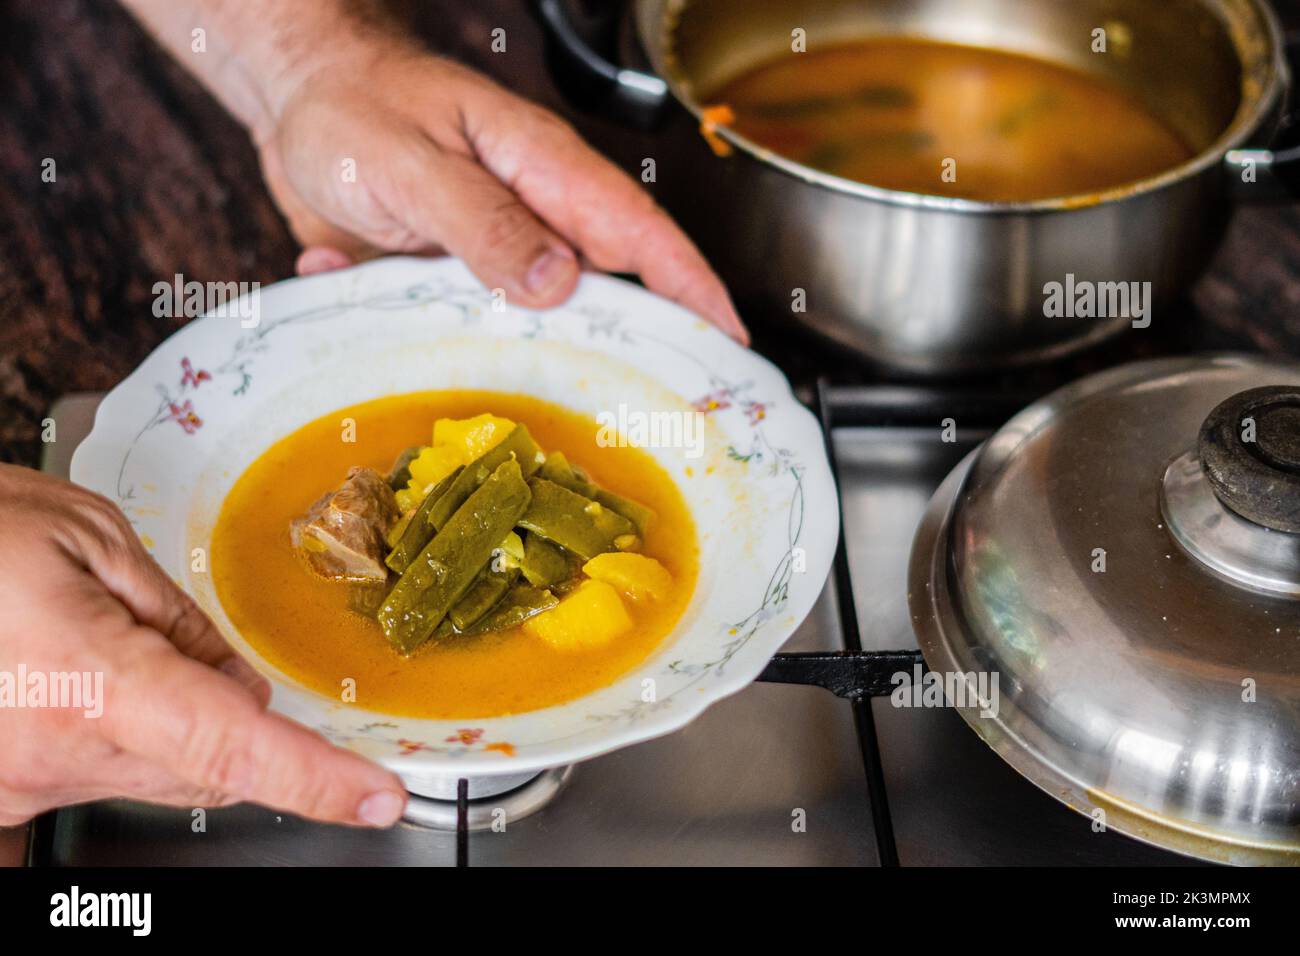 The high-angle view of hands holding a bowl of homemade stew over the stove Stock Photo